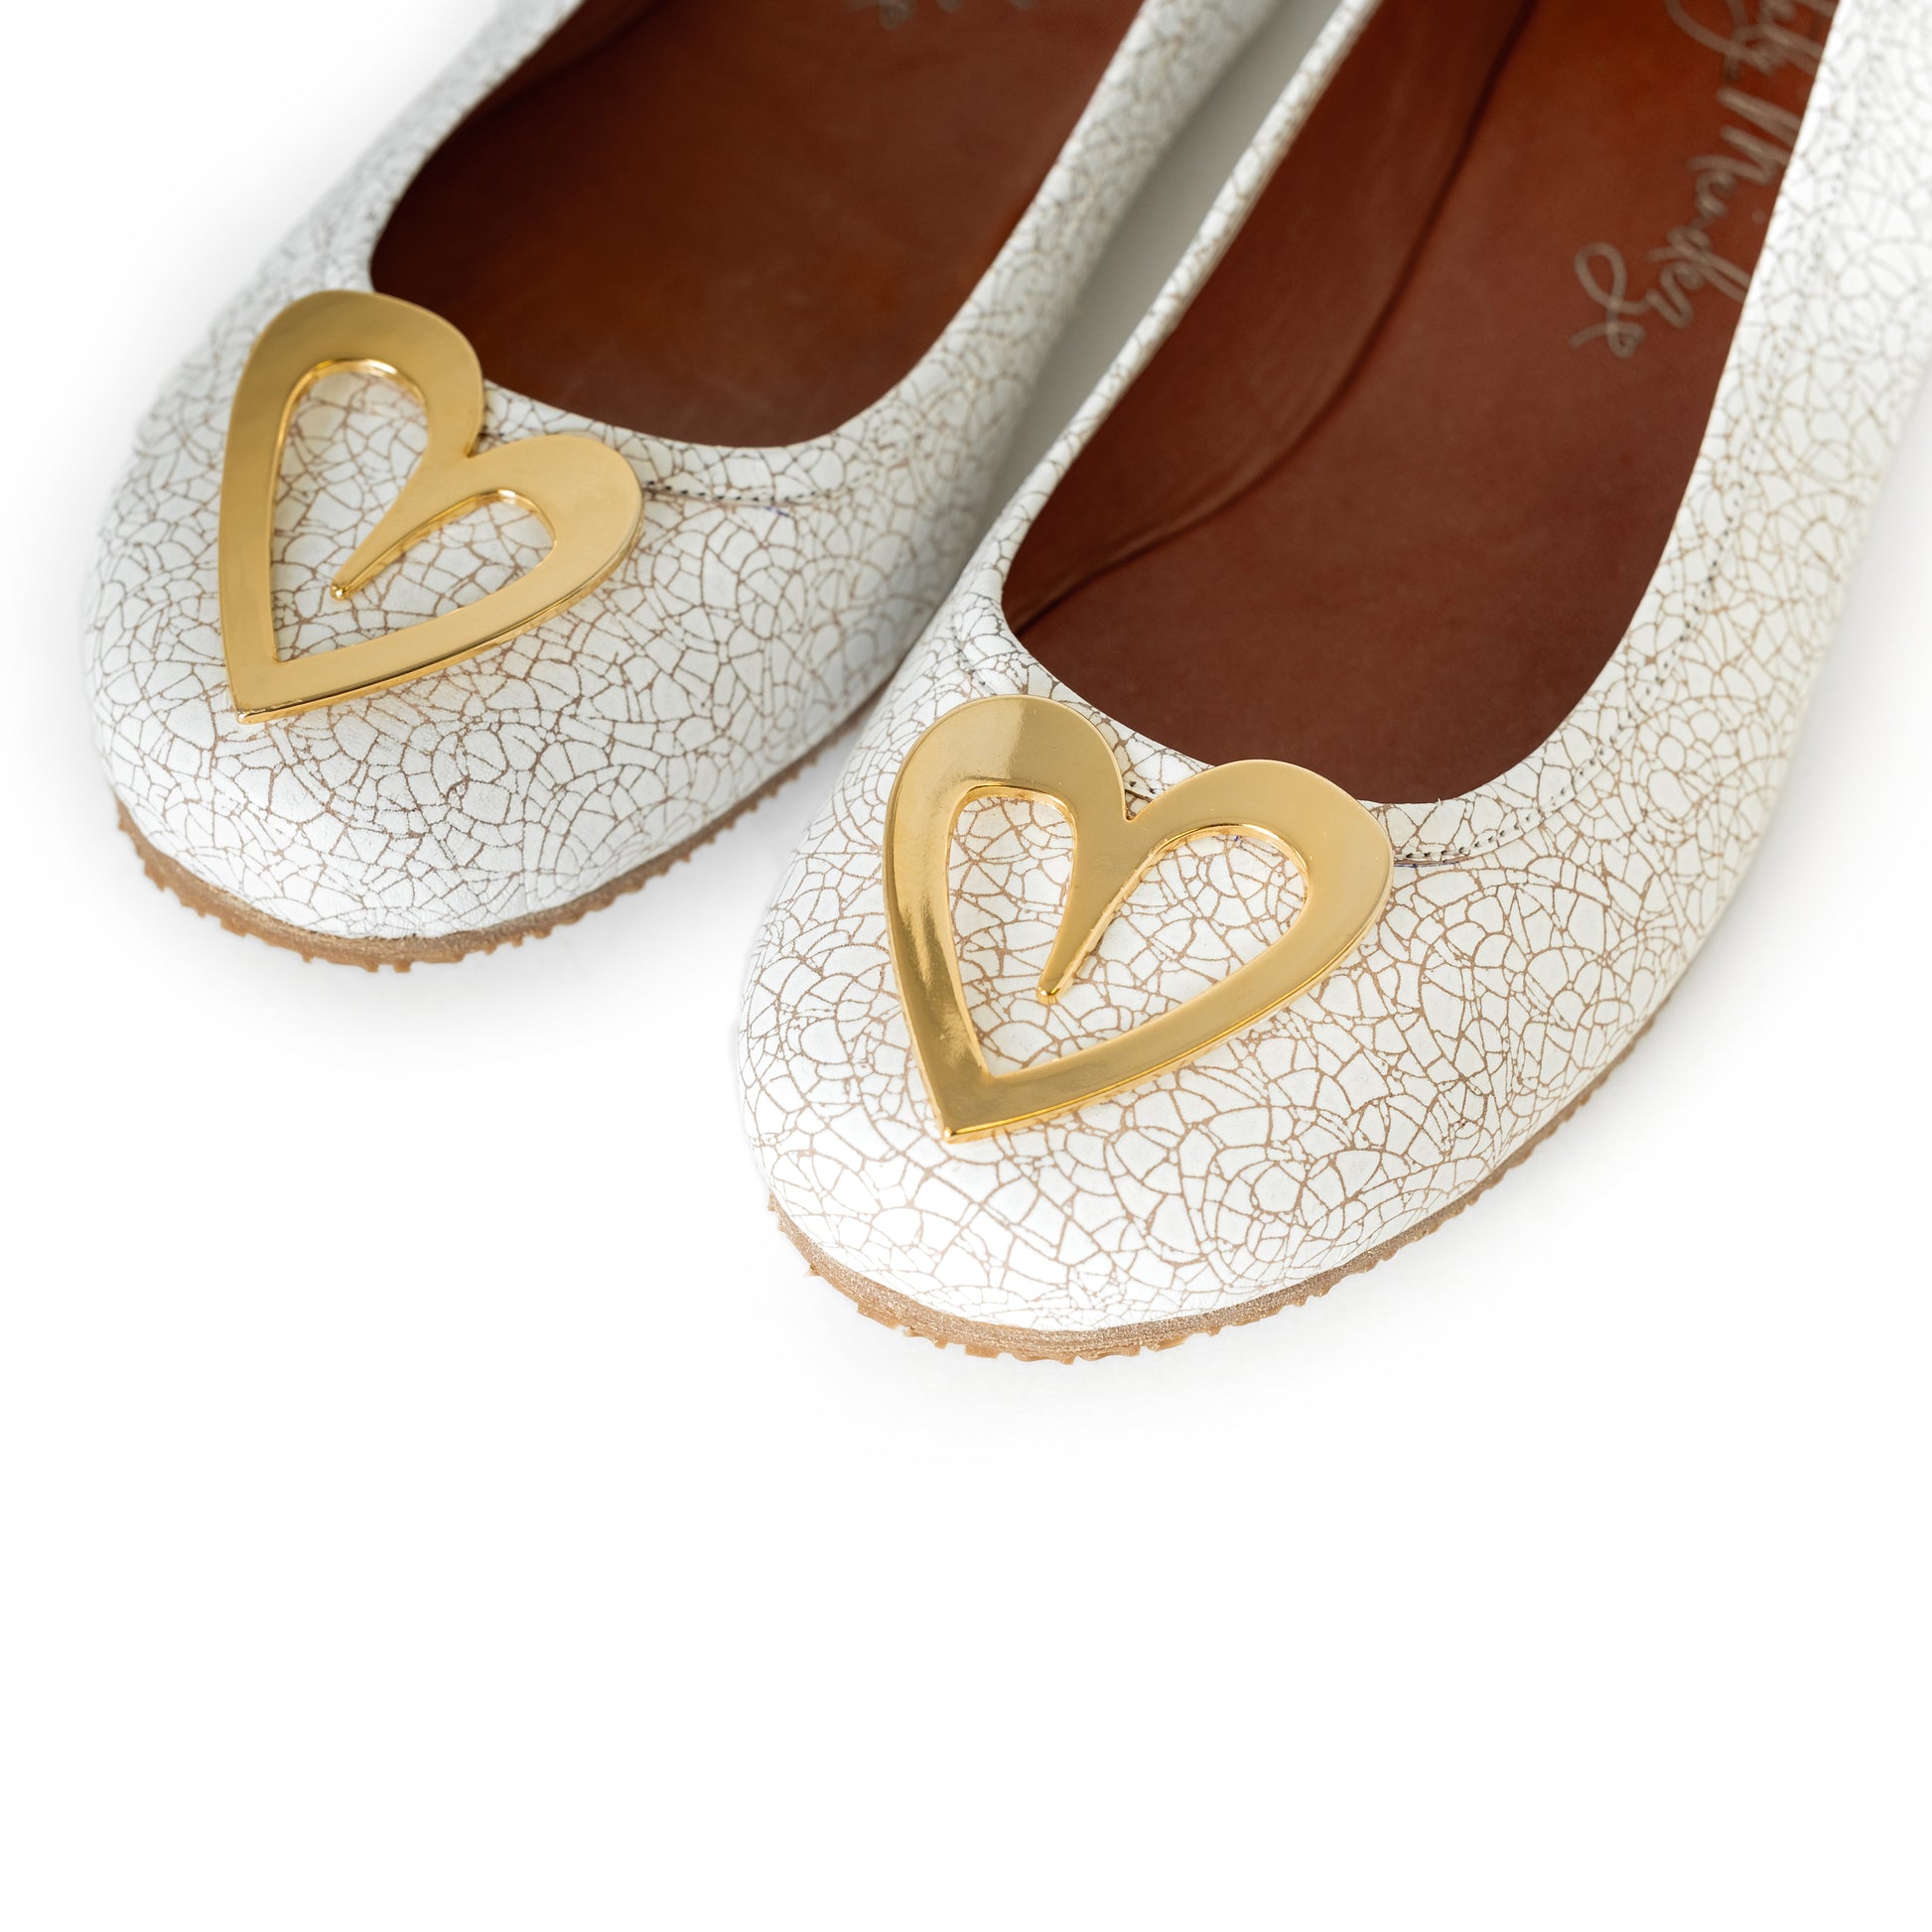 Pipa Ballerinas - White by Nataly Mendez, Genuine leather upper material Leather insole lining Heel height .5 cm